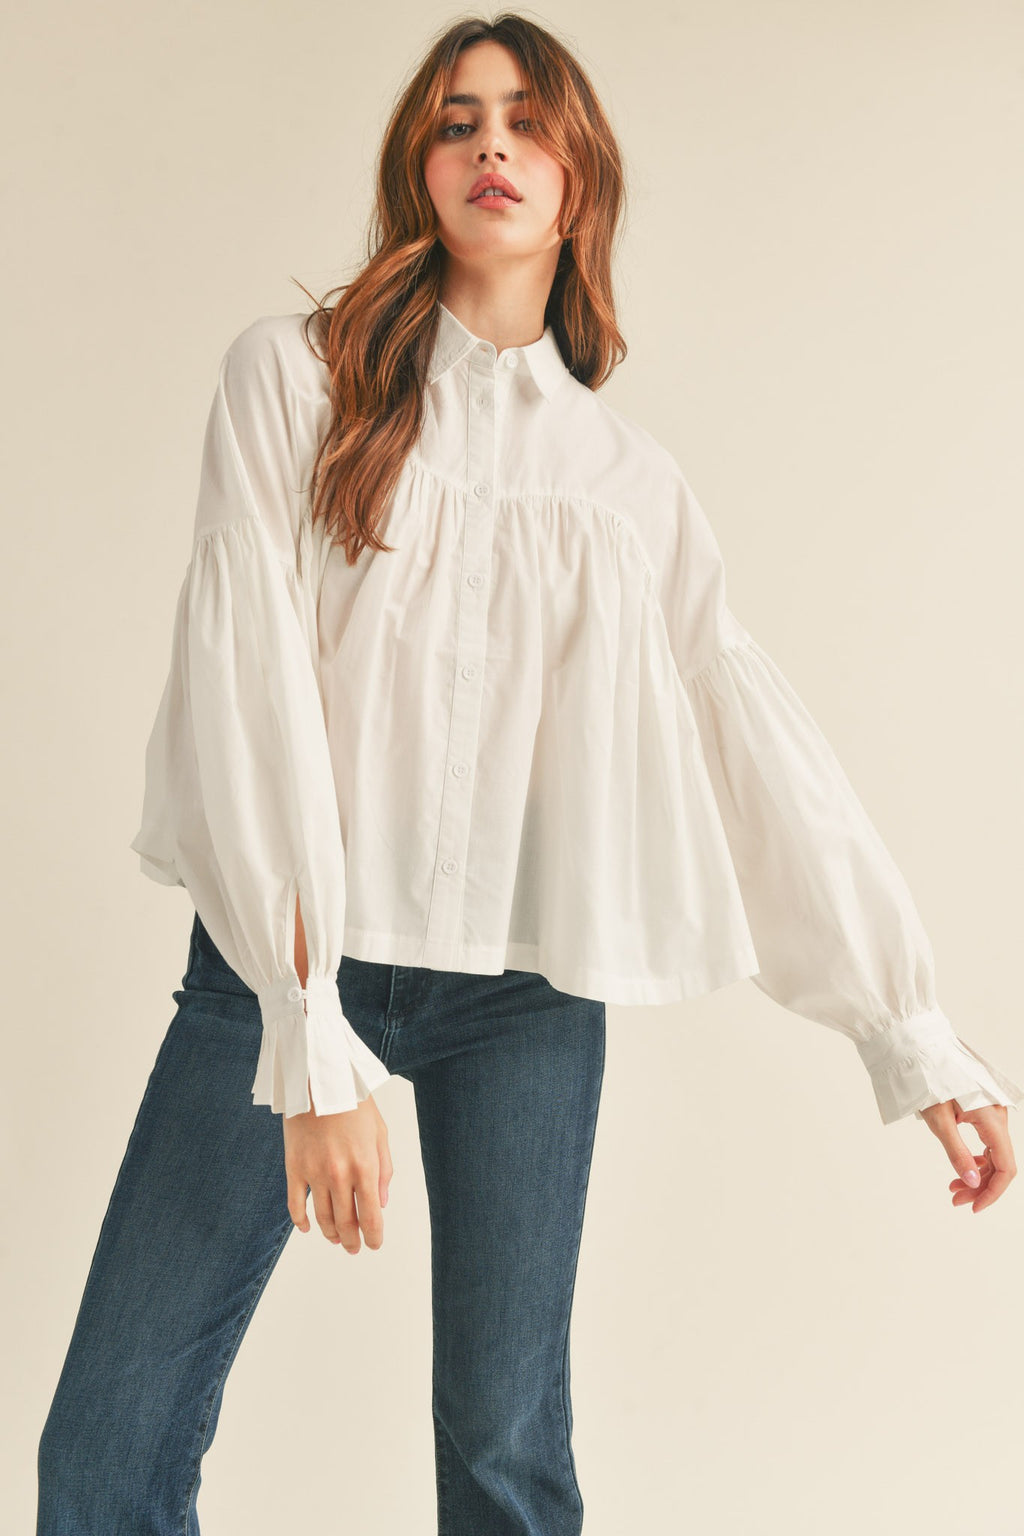 Keep It Simple Button Down Top